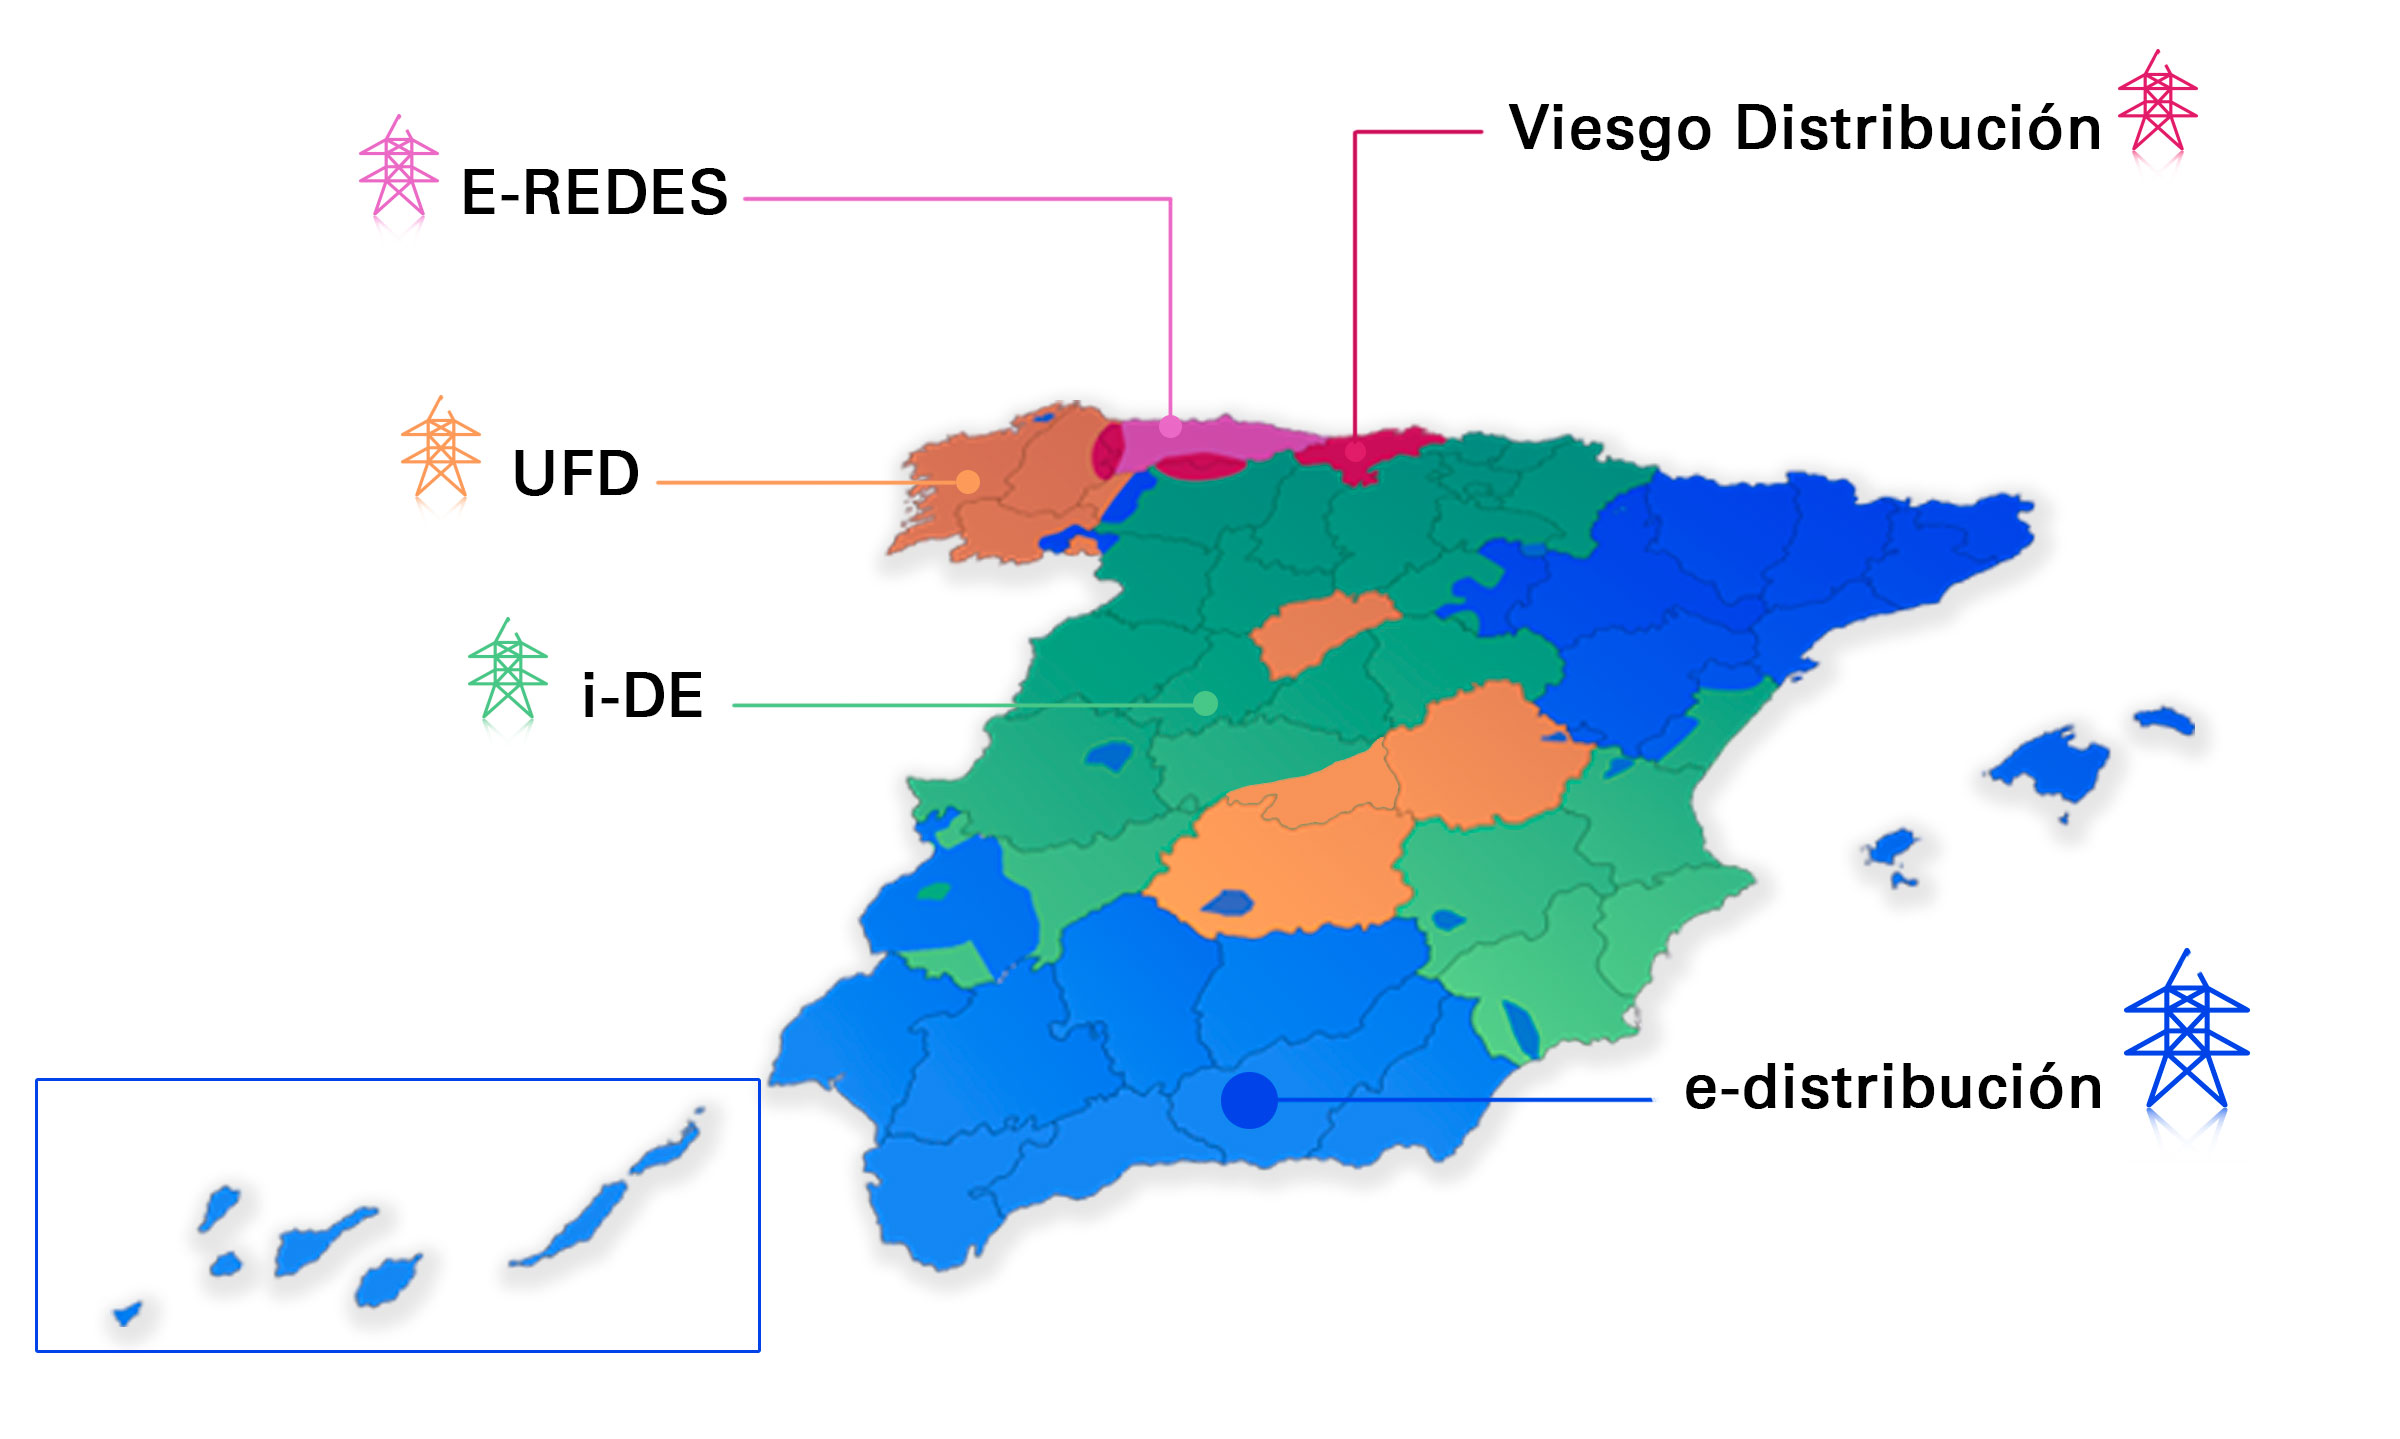 Map of Spain with the areas pertaining to each electricity distribution company.